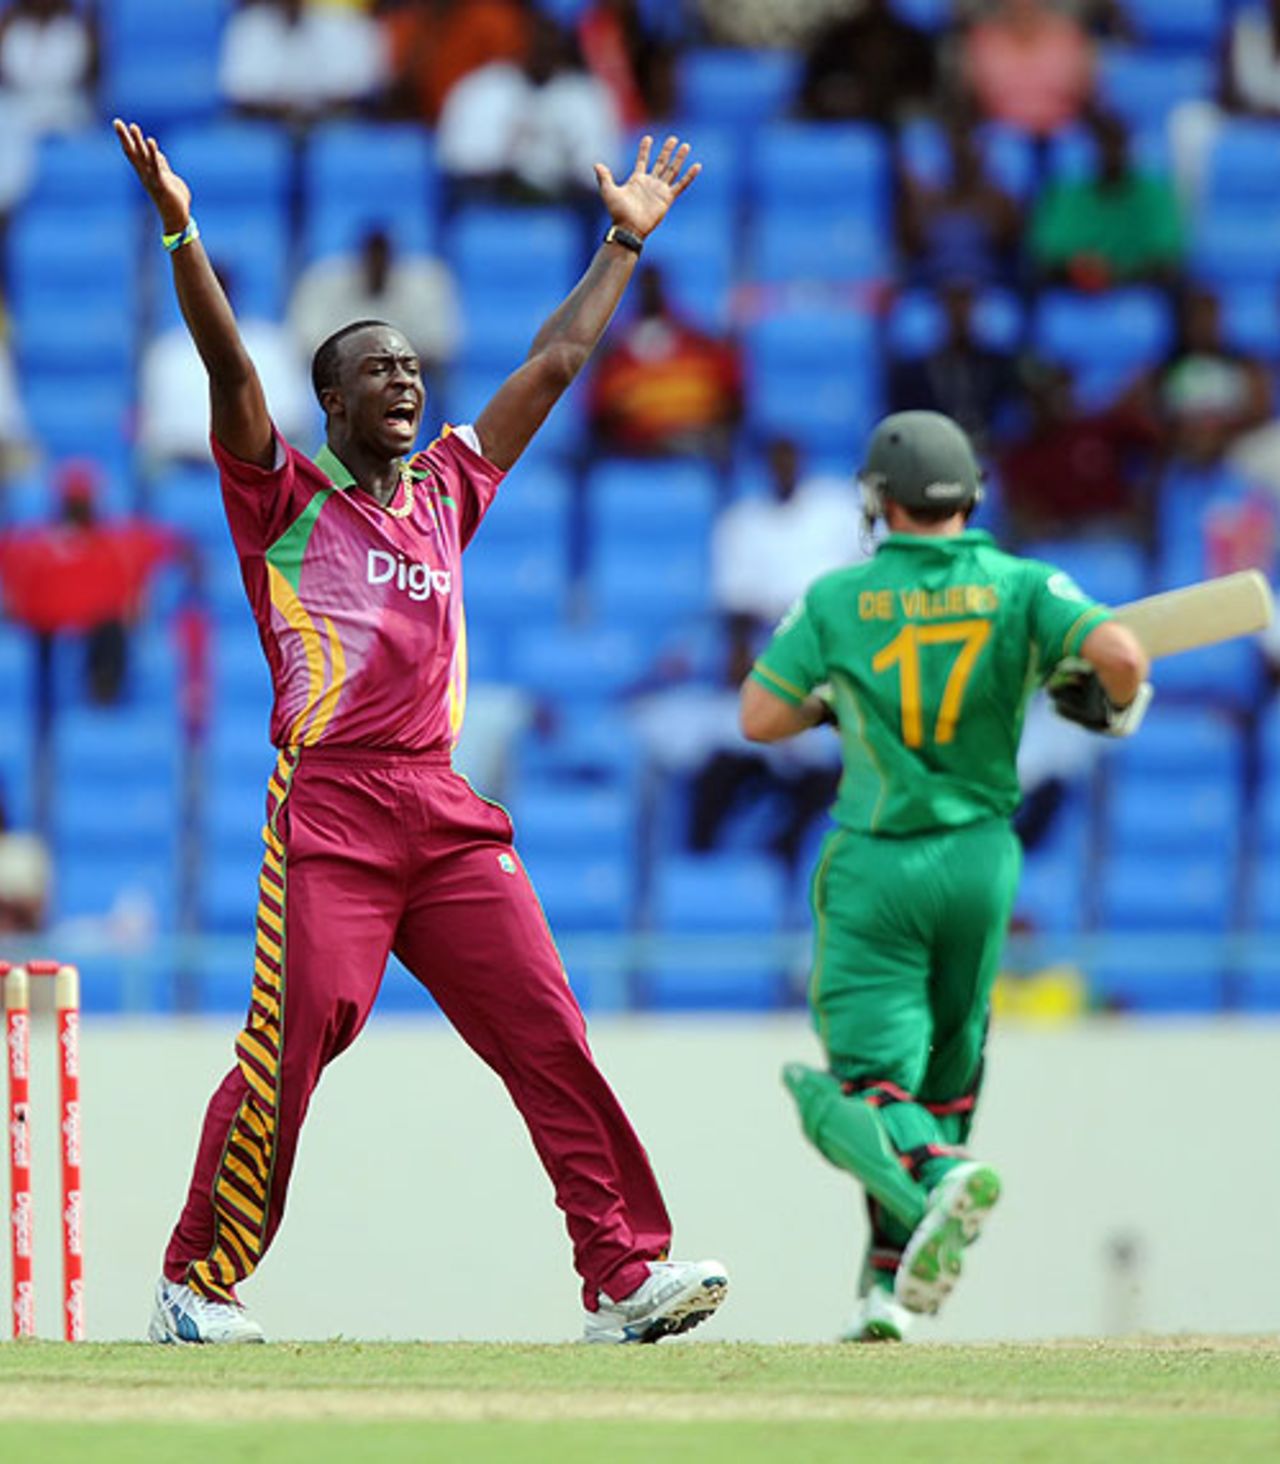 Kemar Roach claimed 2 for 25 in four overs. West Indies v South Africa, 1st Twenty20, Antigua, May 19, 2010